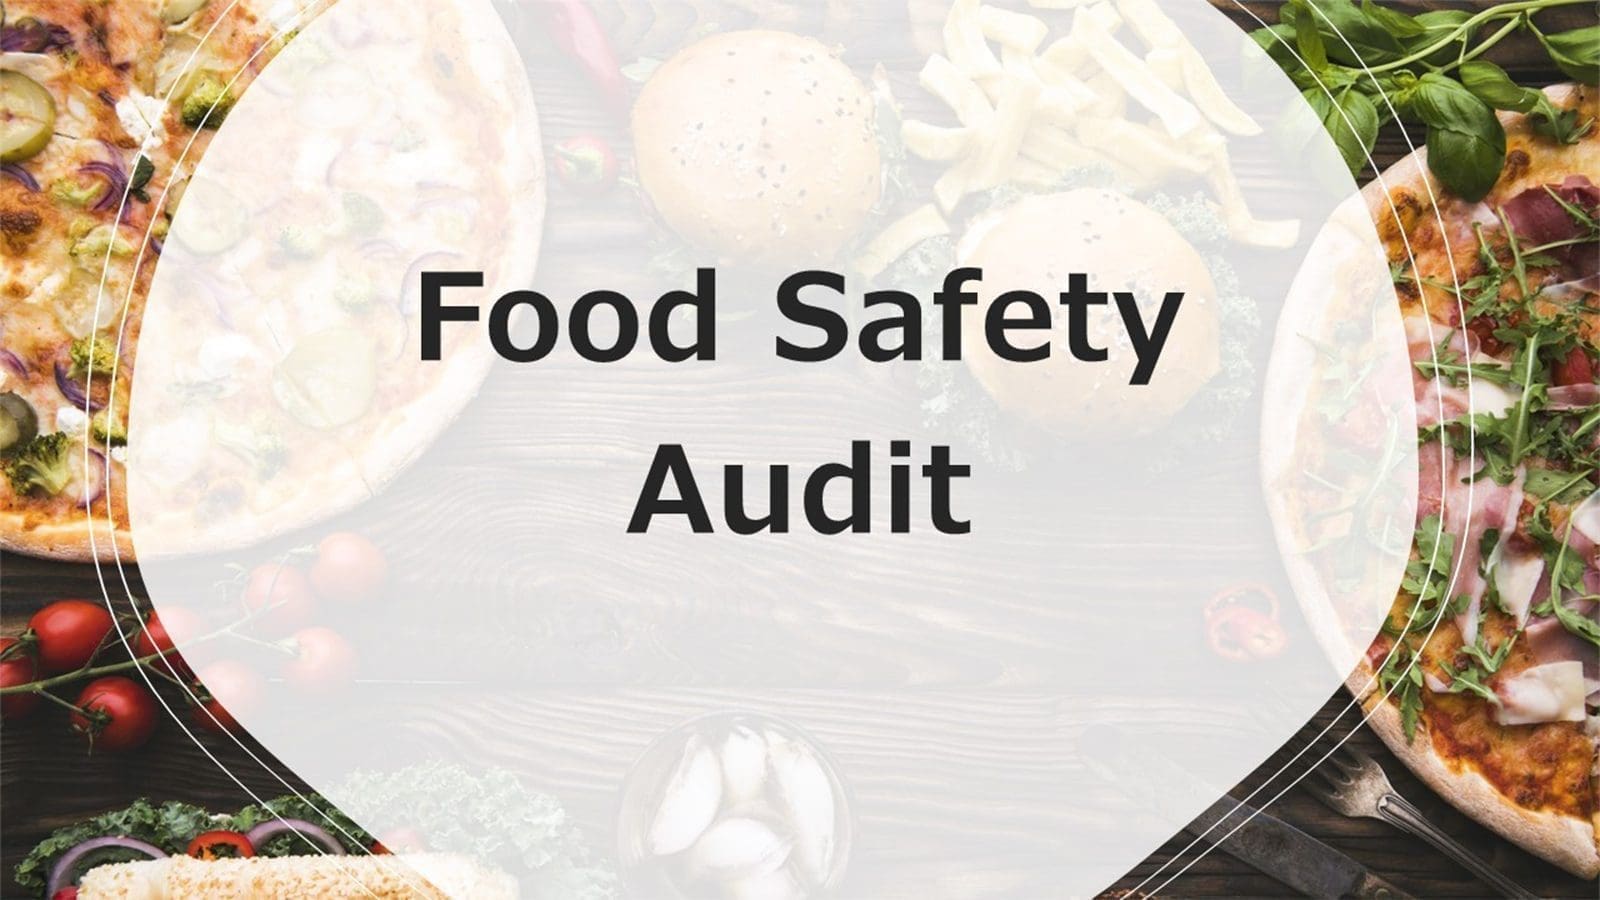 FDA finds third-party food safety standards aligned with FSMA regulations